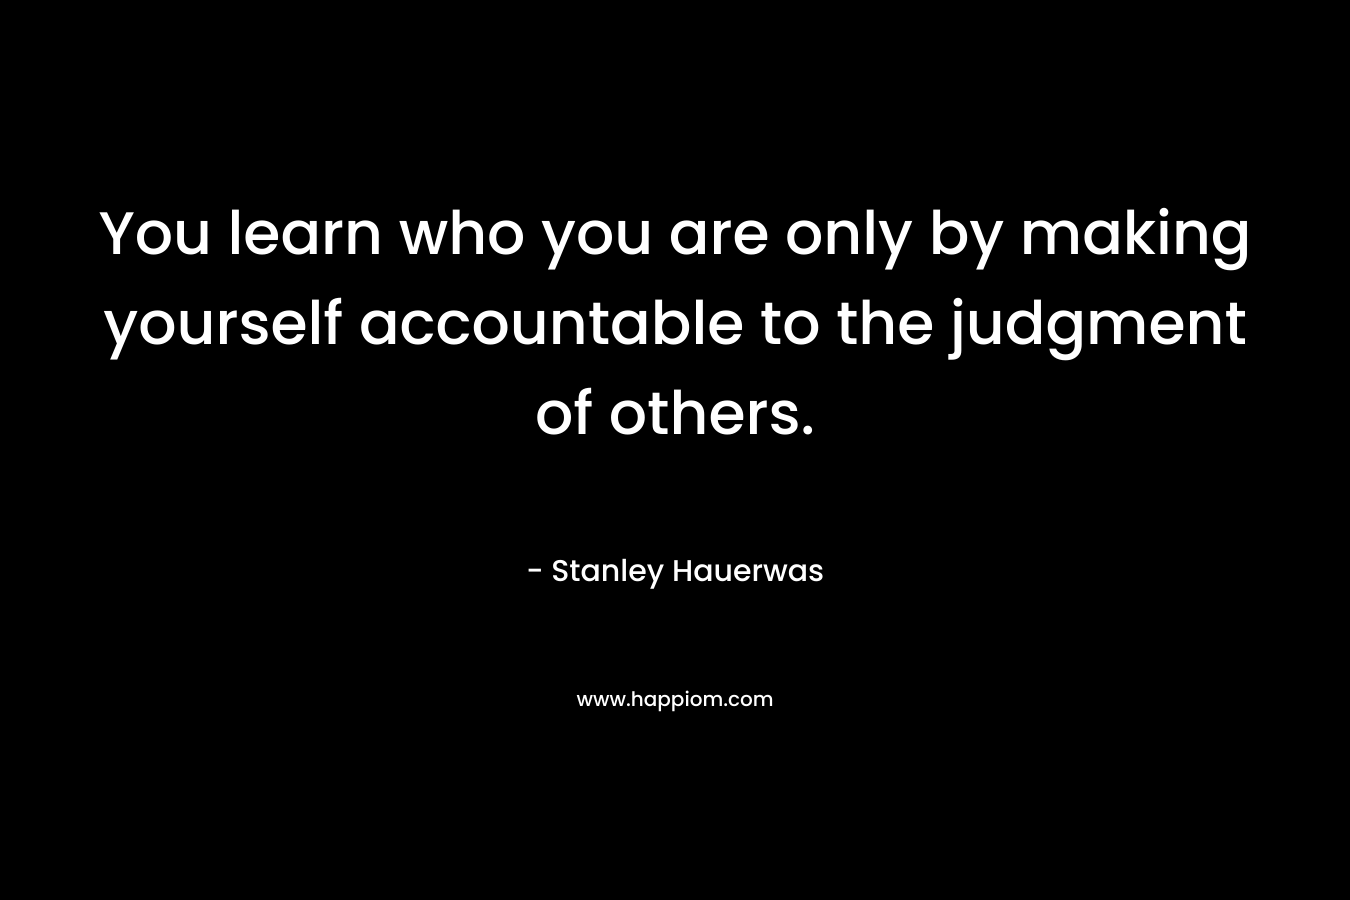 You learn who you are only by making yourself accountable to the judgment of others.